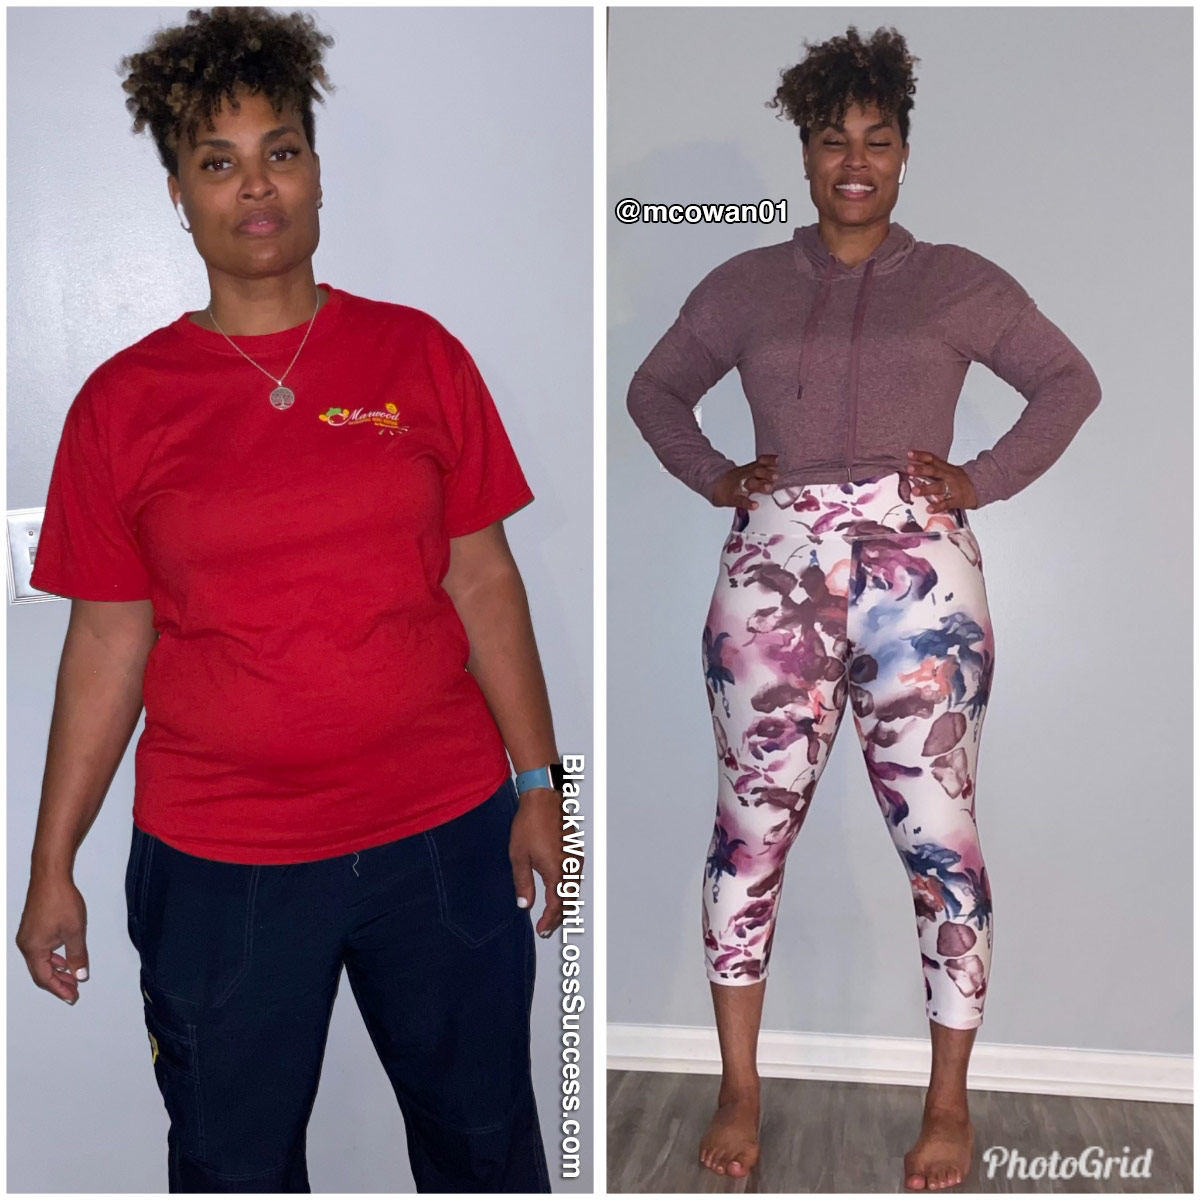 Michelle before and after weight loss